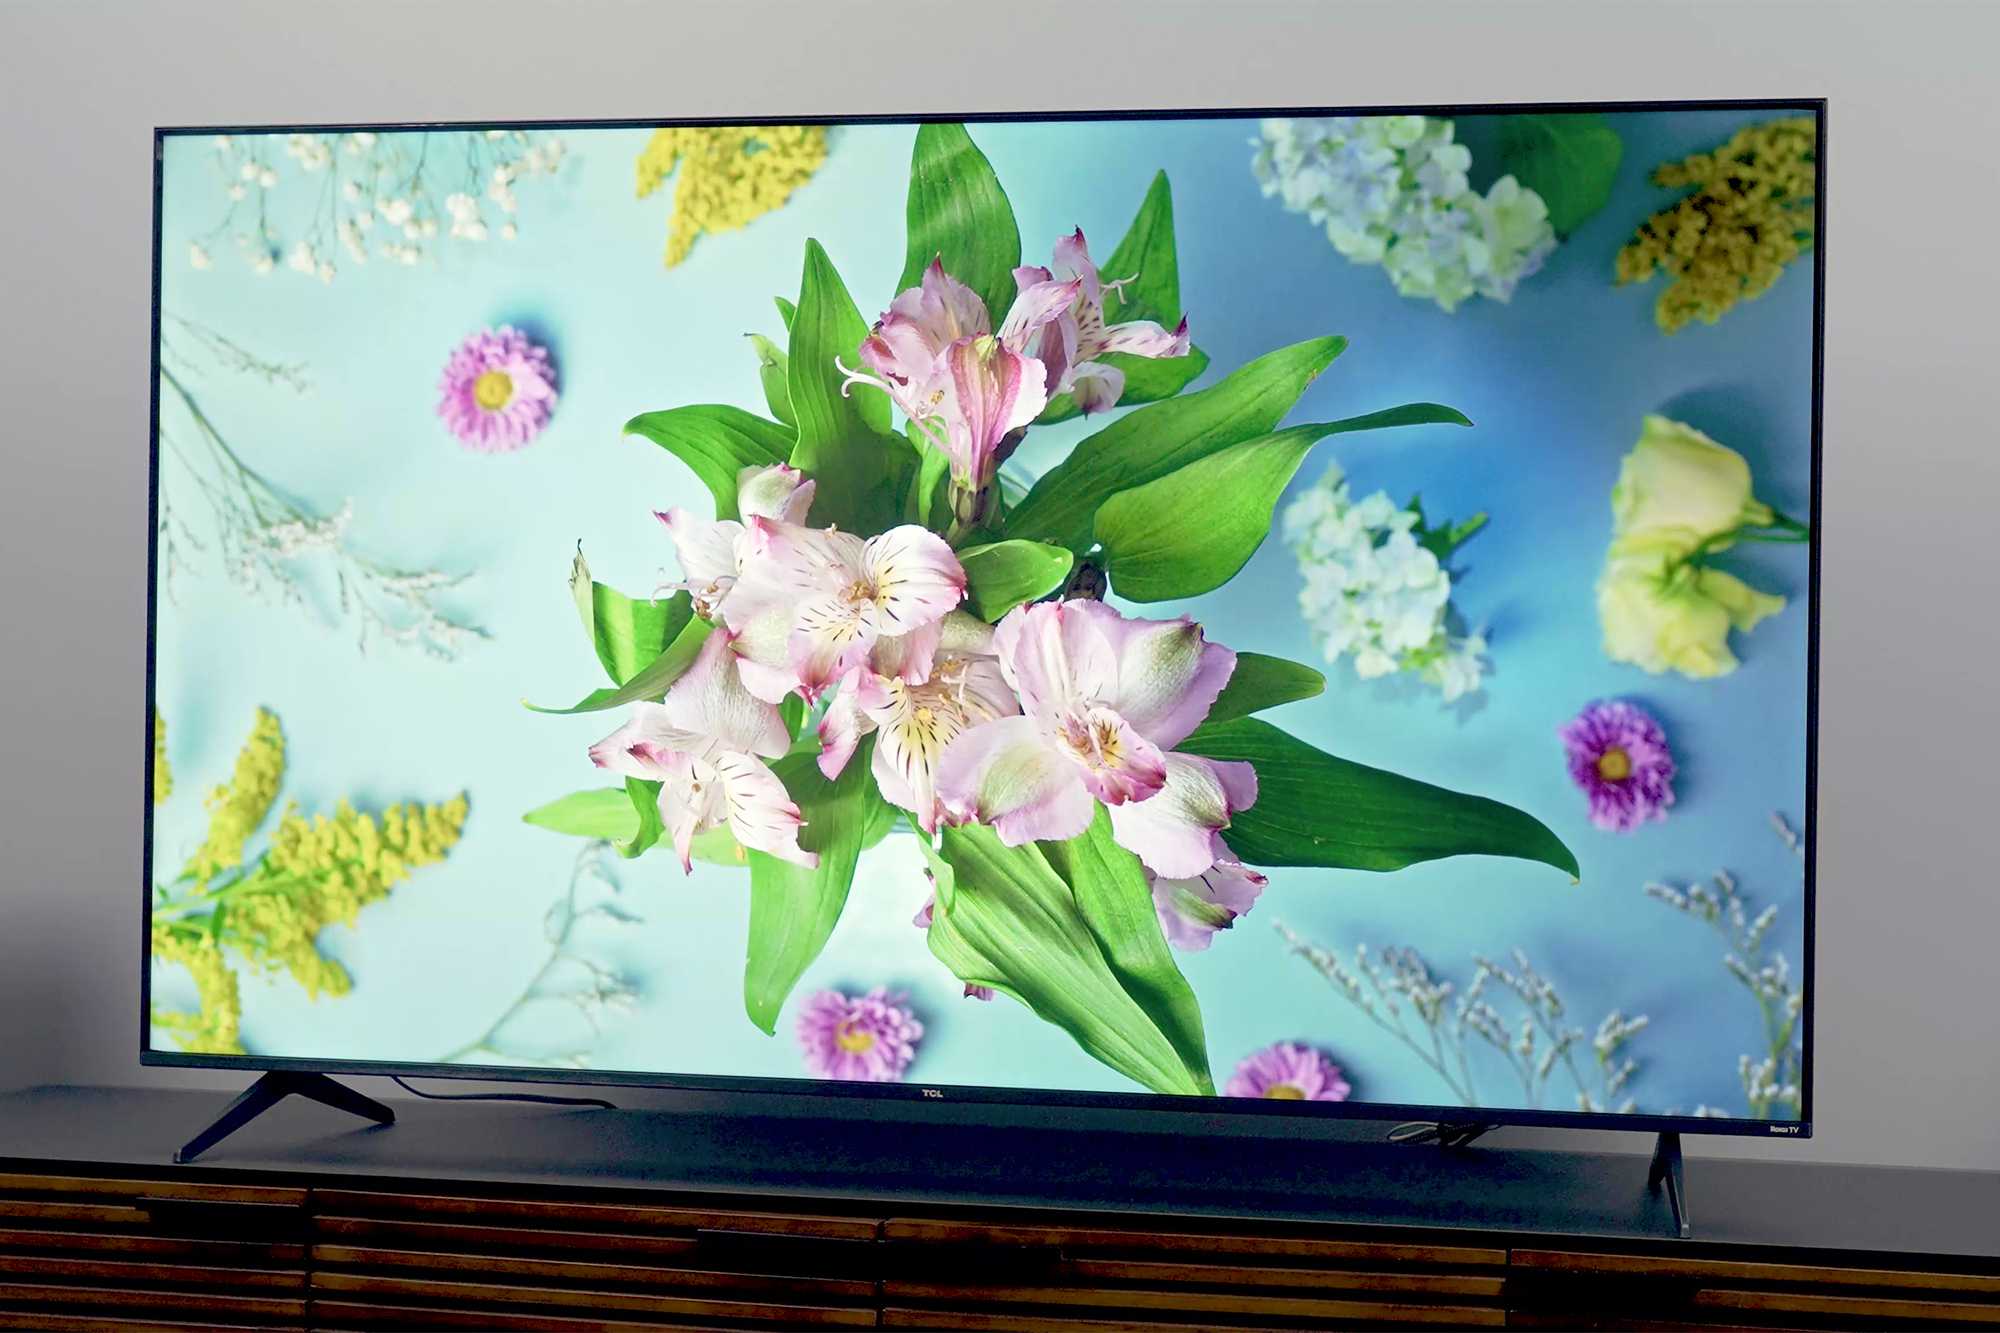 A colorful floral scene on the TCL-5 Series (S555).